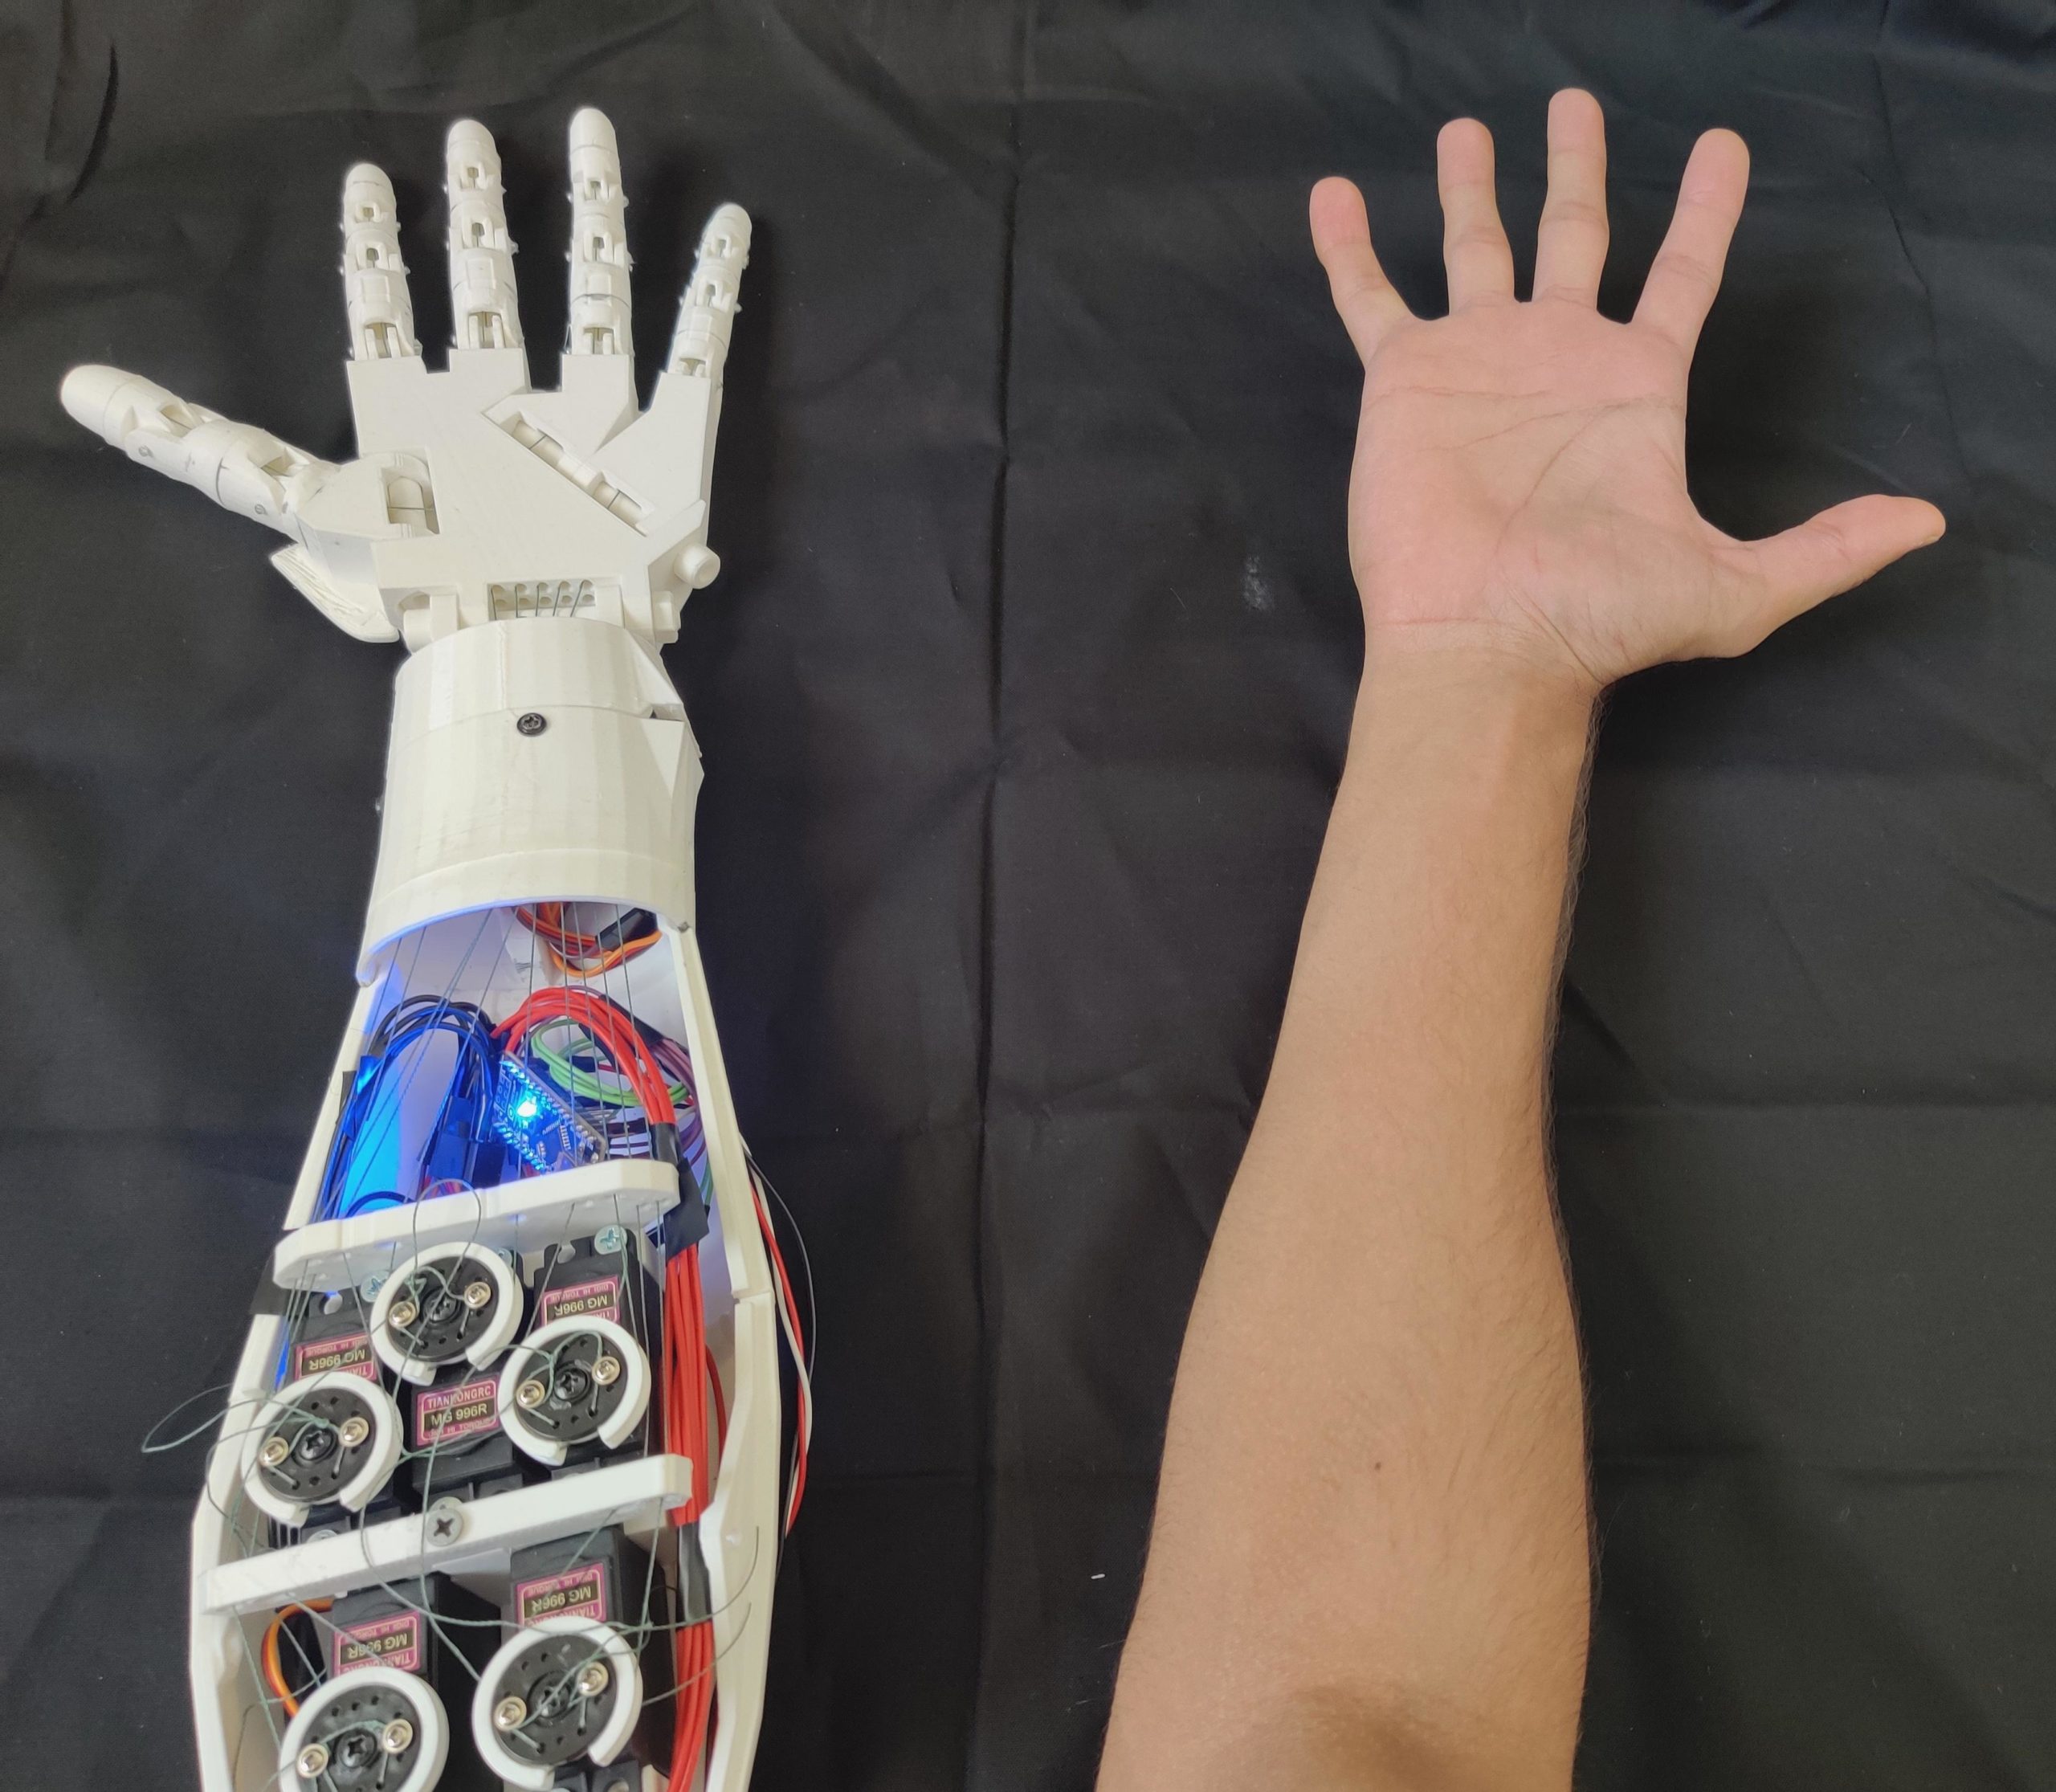 Designing a 3D-printed EMG bionic hand as a low-cost alternative